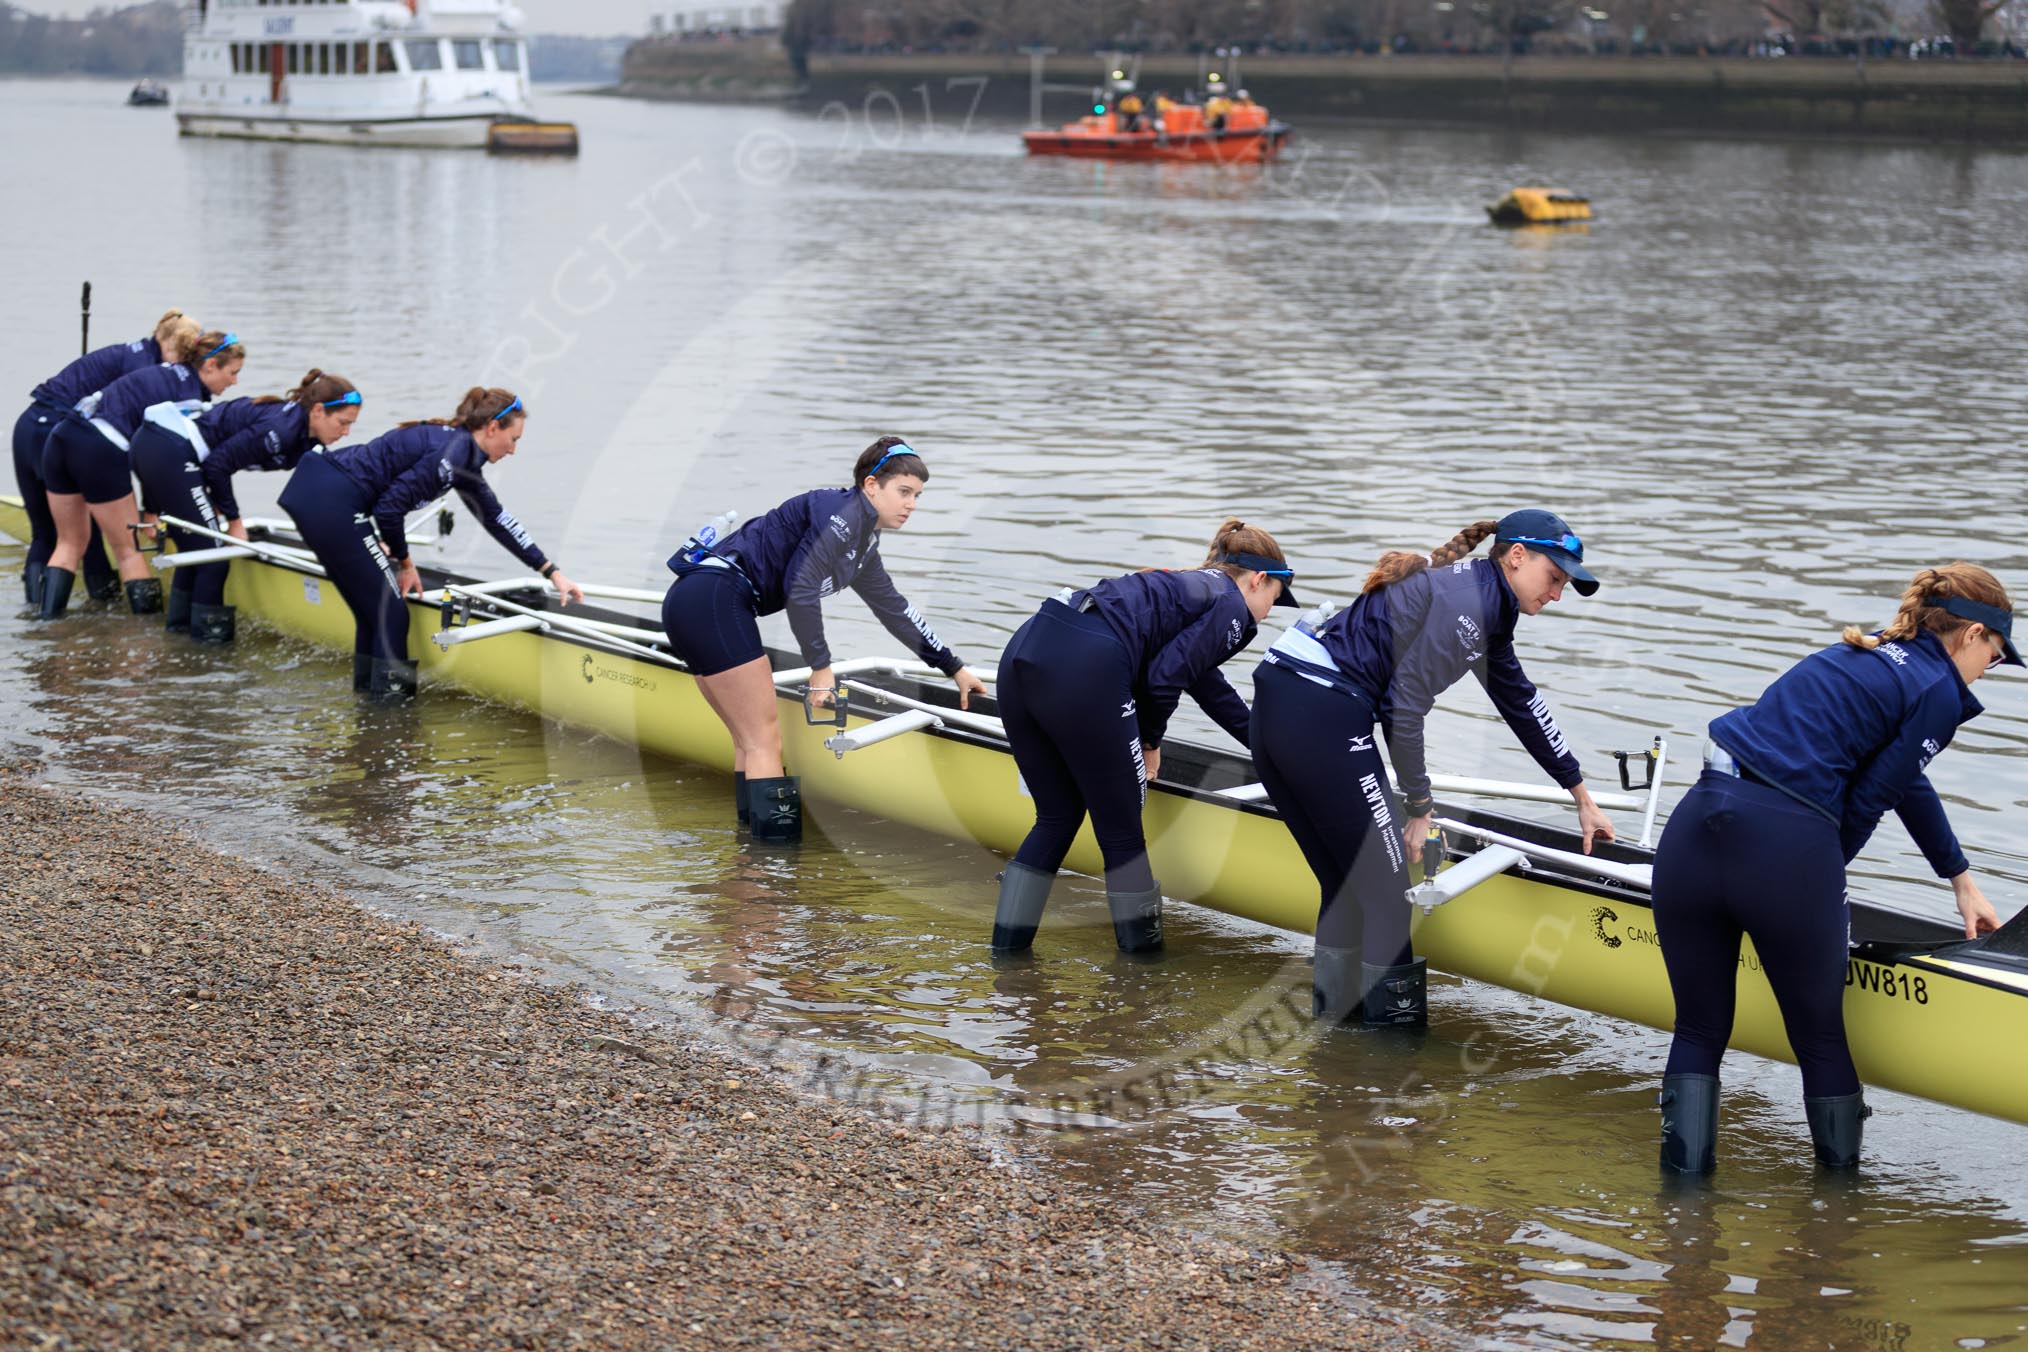 The Cancer Research UK Women's Boat Race 2018: The Oxford Blue Boat crew getting their boat on the river.
River Thames between Putney Bridge and Mortlake,
London SW15,

United Kingdom,
on 24 March 2018 at 15:43, image #98